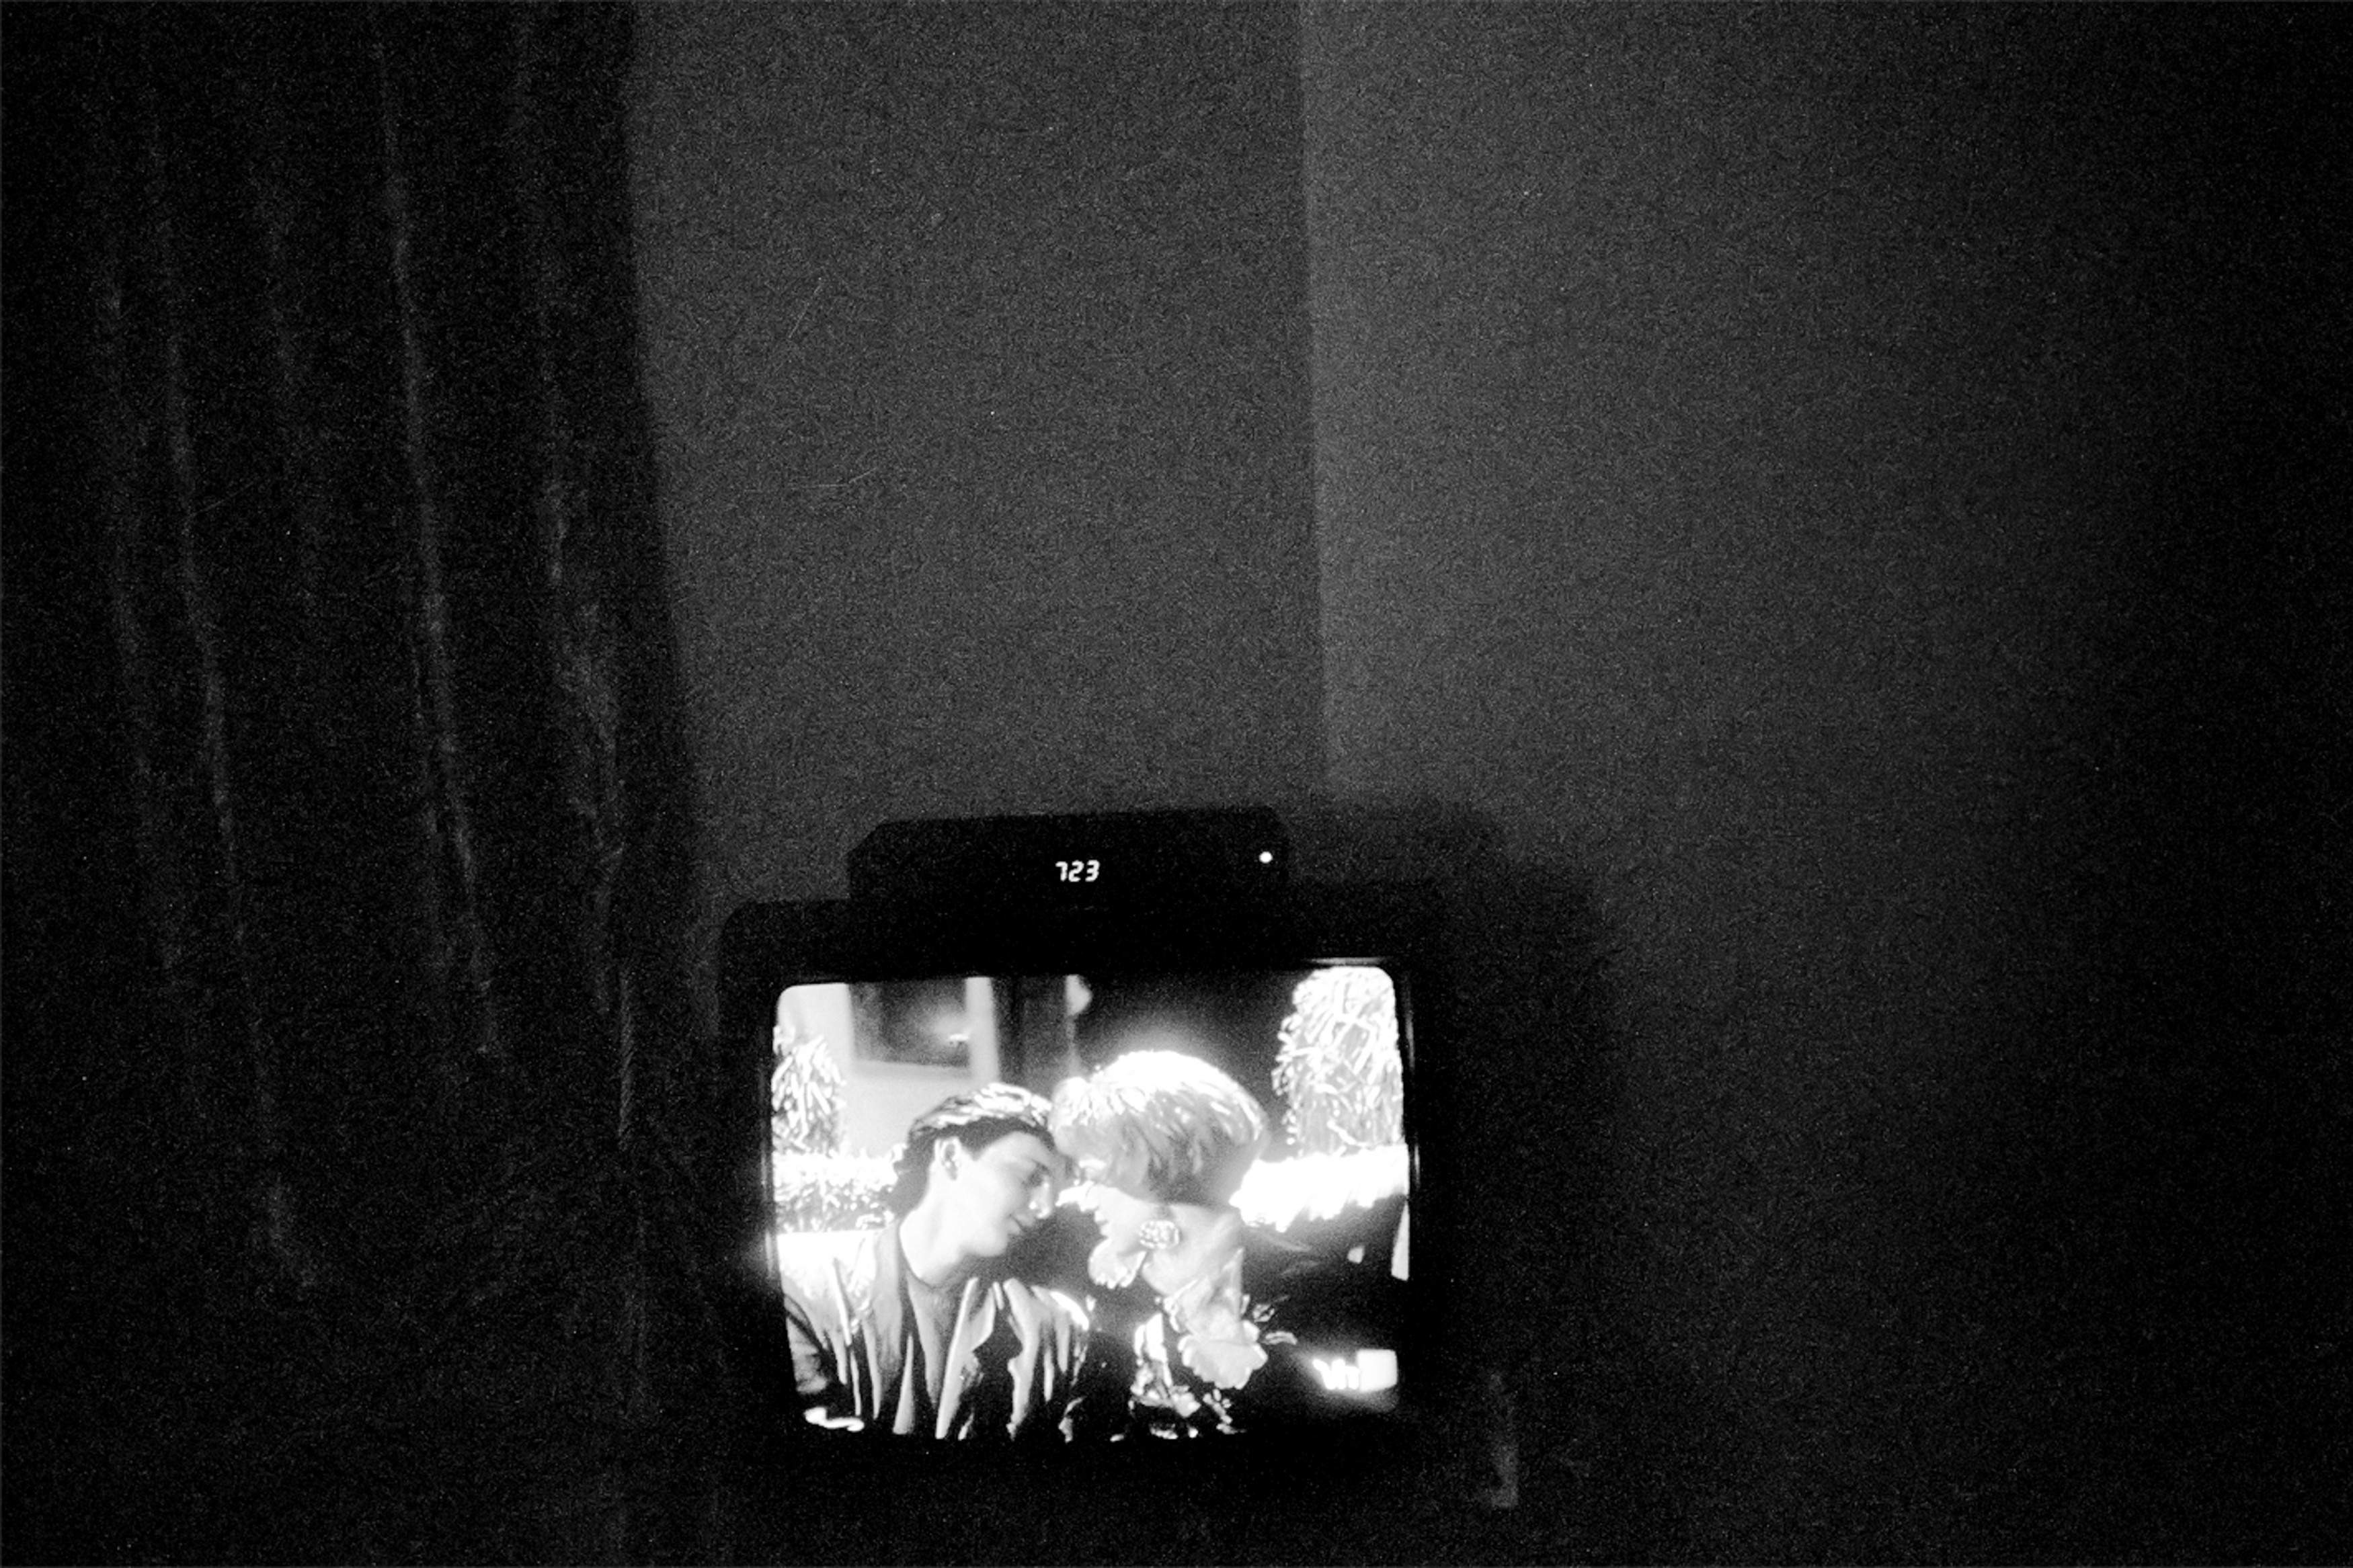 On a TV screen, two people look at each other. Apartment of Dale Layne. March 8, 2012